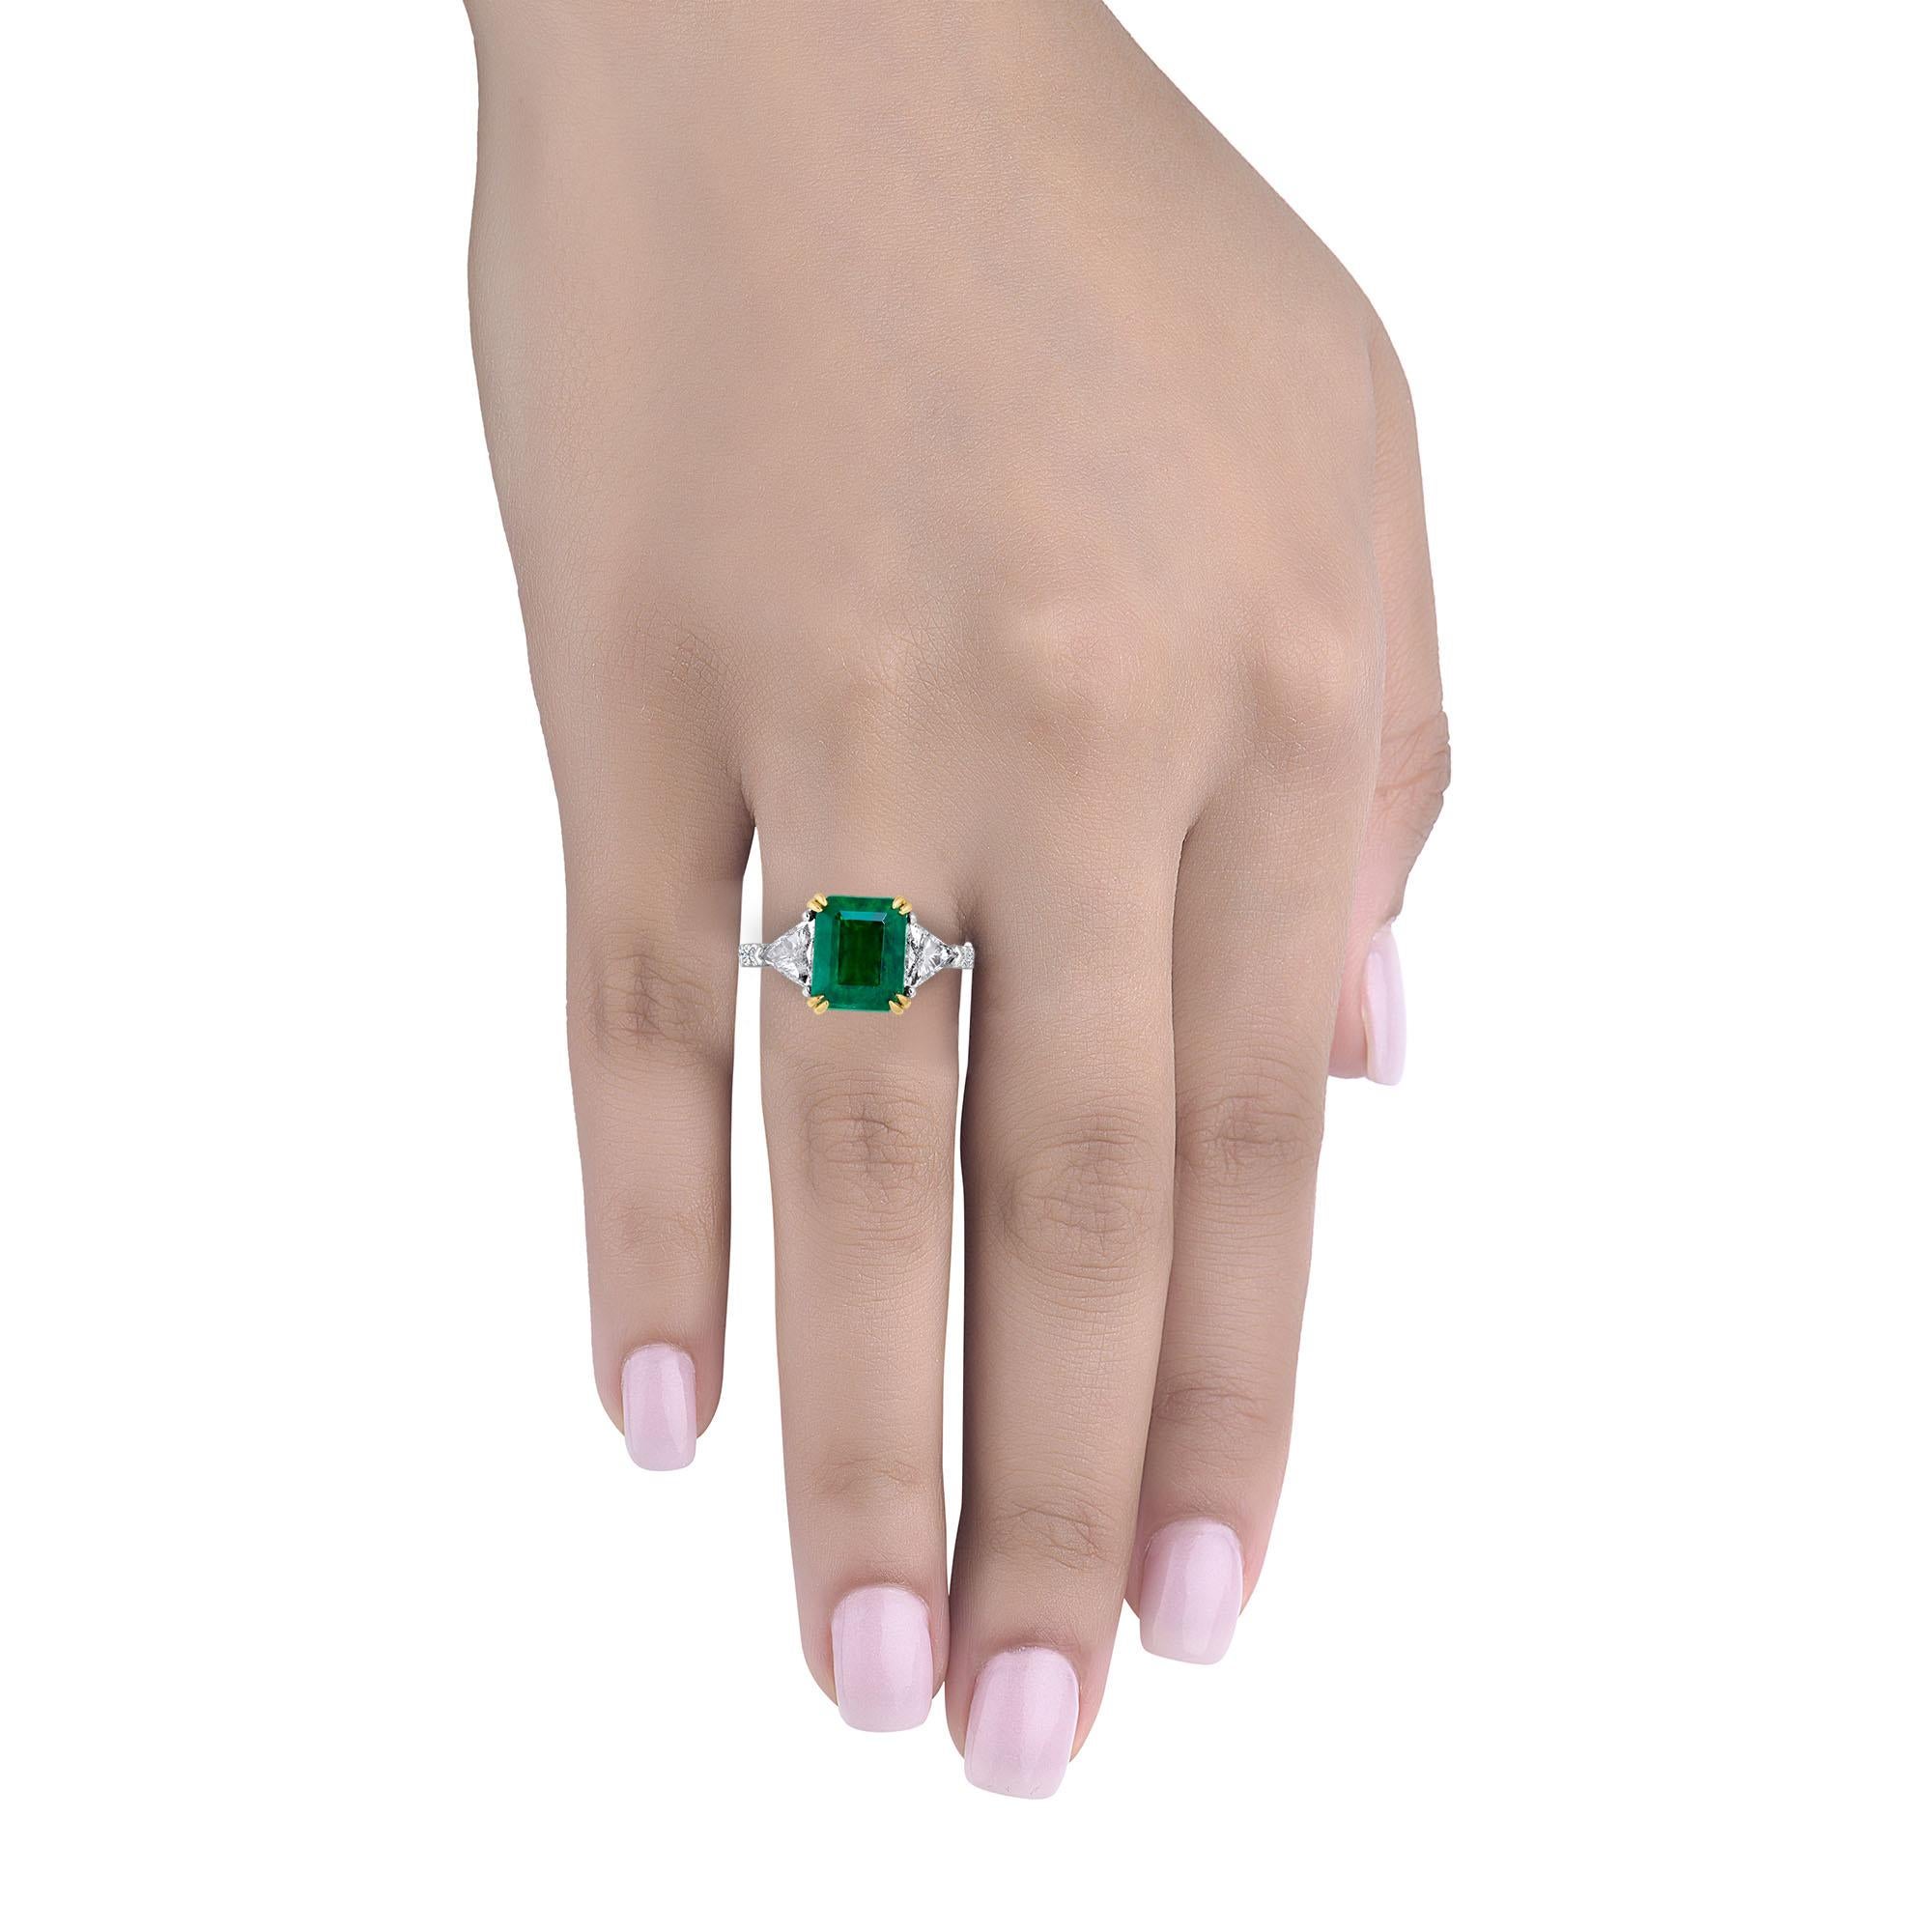 Hand made in Platinum in the Emilio Jewelry factory! The Emerald is certified by GIA. 
Center Stone: 3.32ct genuine certified zambian emerald of vivid green color and totally eye clean 9.80mmx8.00mm. Excellent crystal and transparency. Gem of a